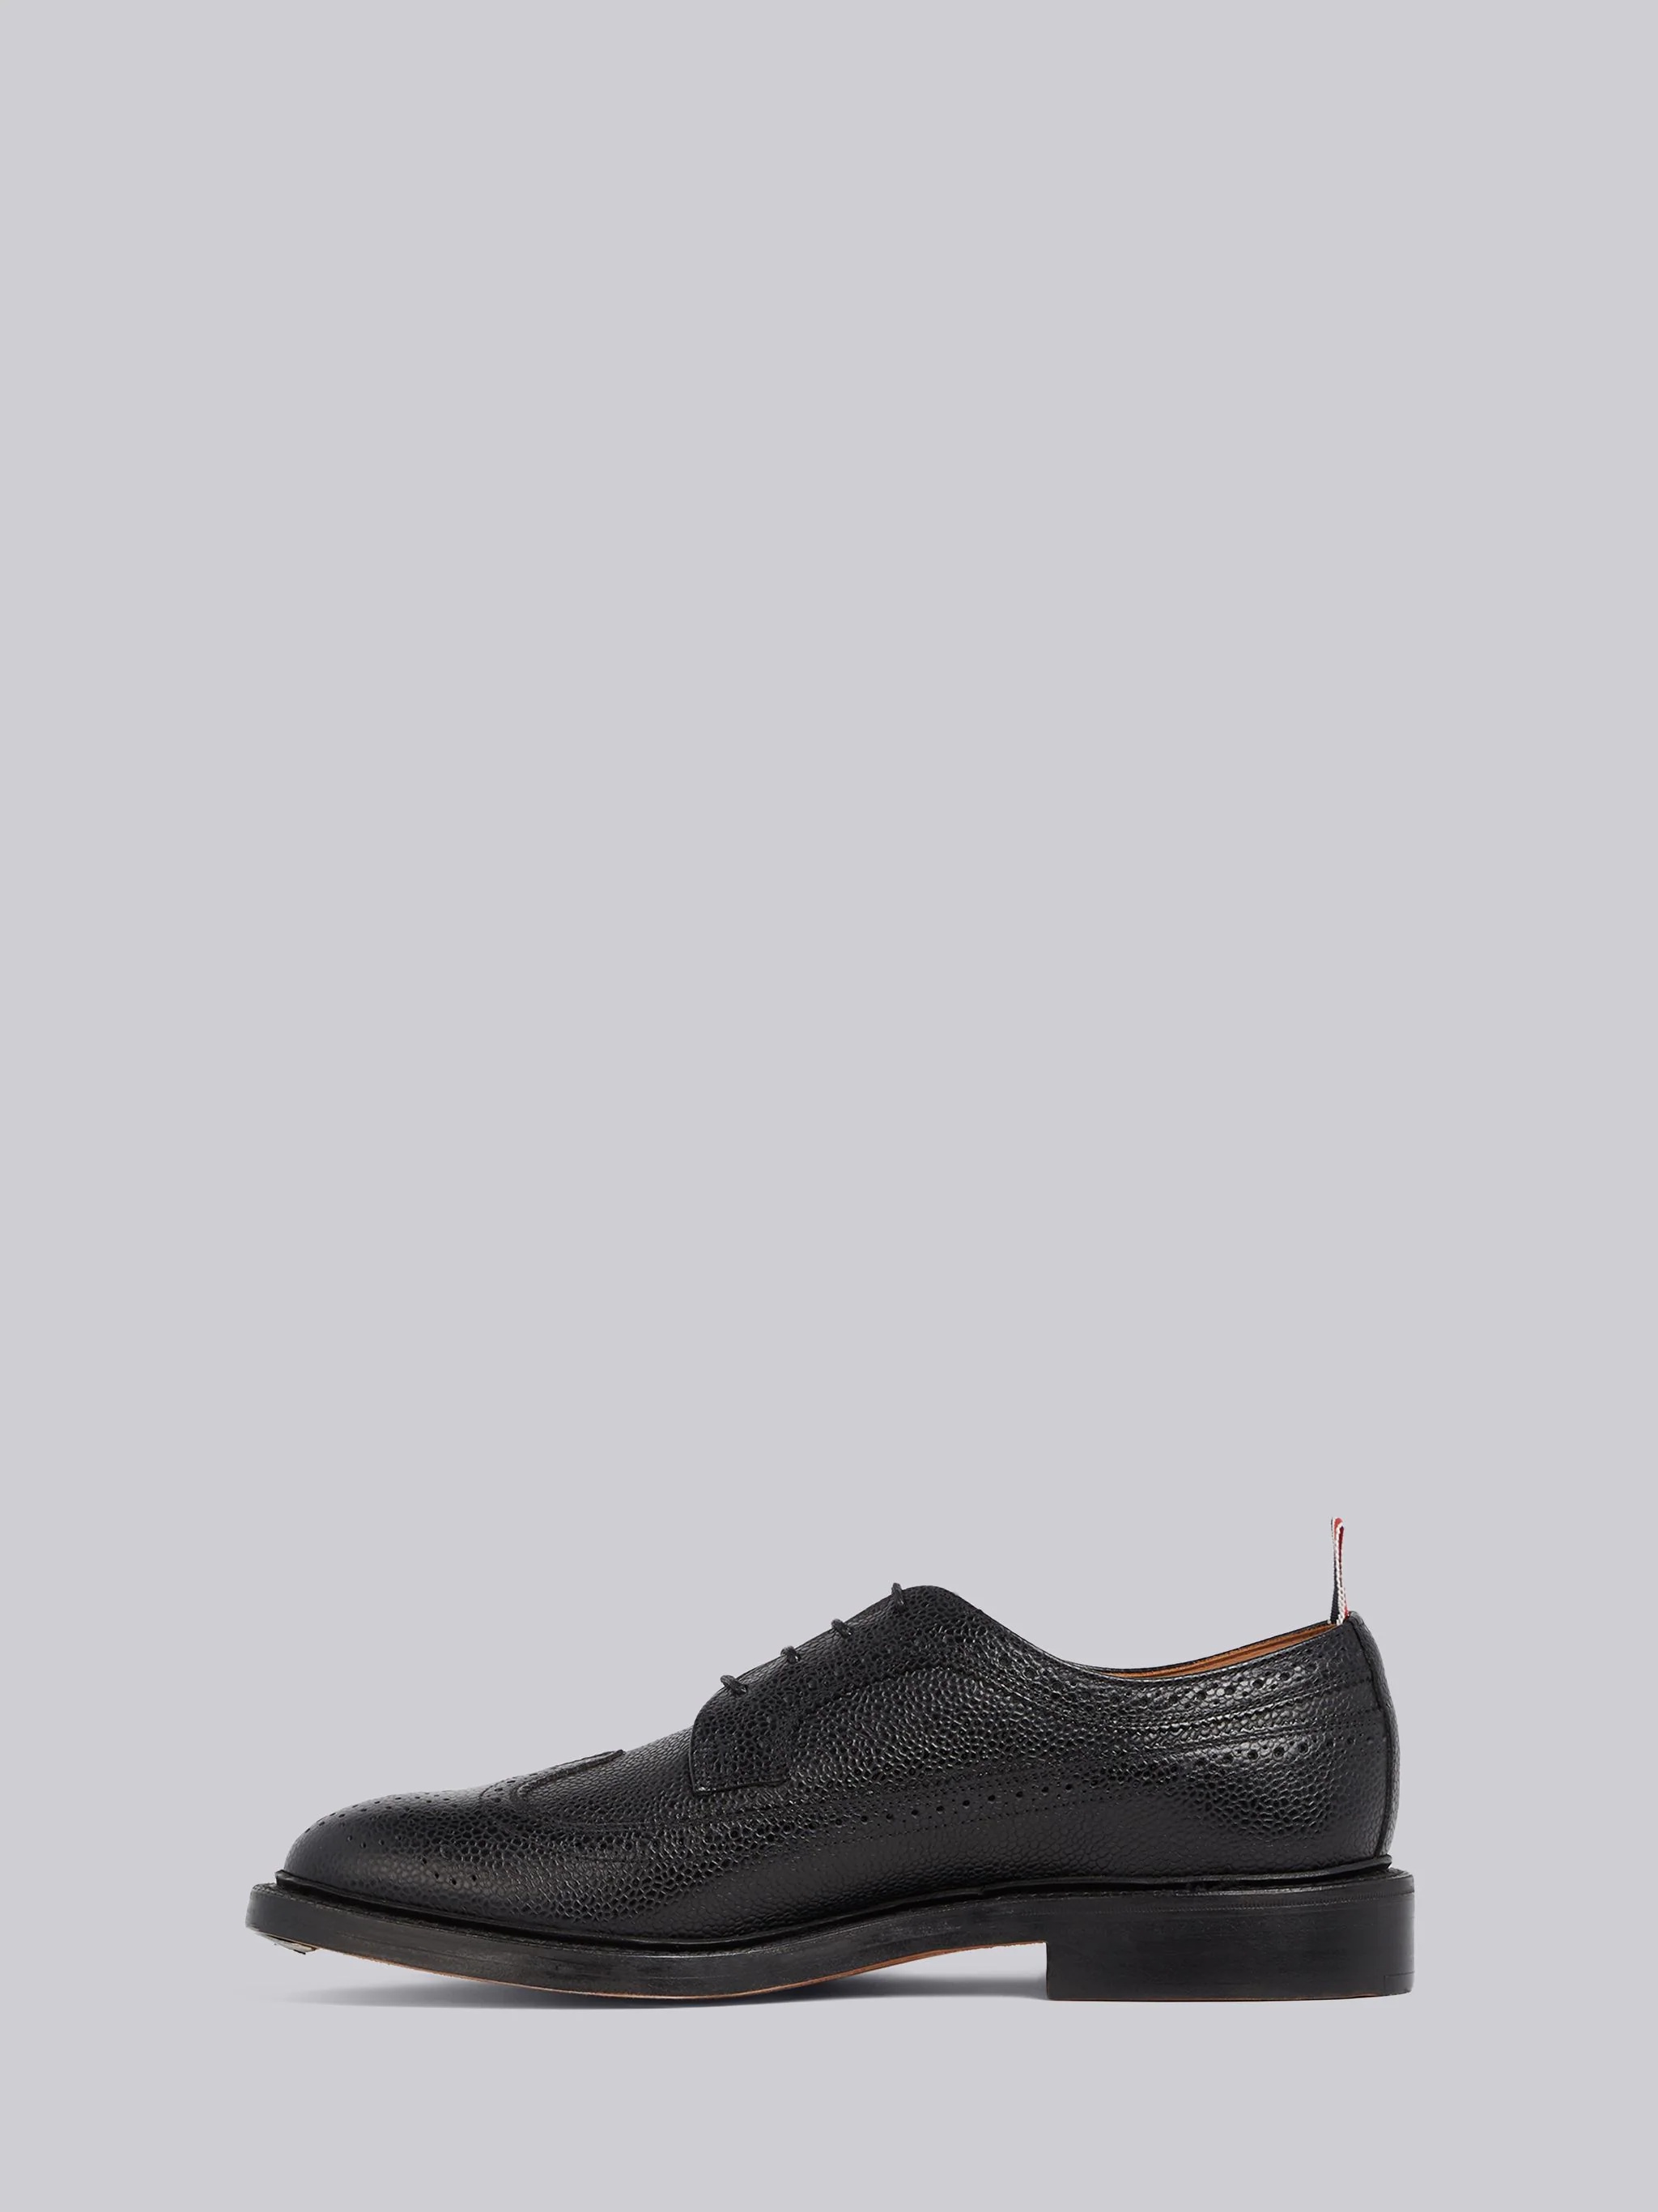 Black Pebble Grain Classic Longwing Brogue With Leather Sole - 3